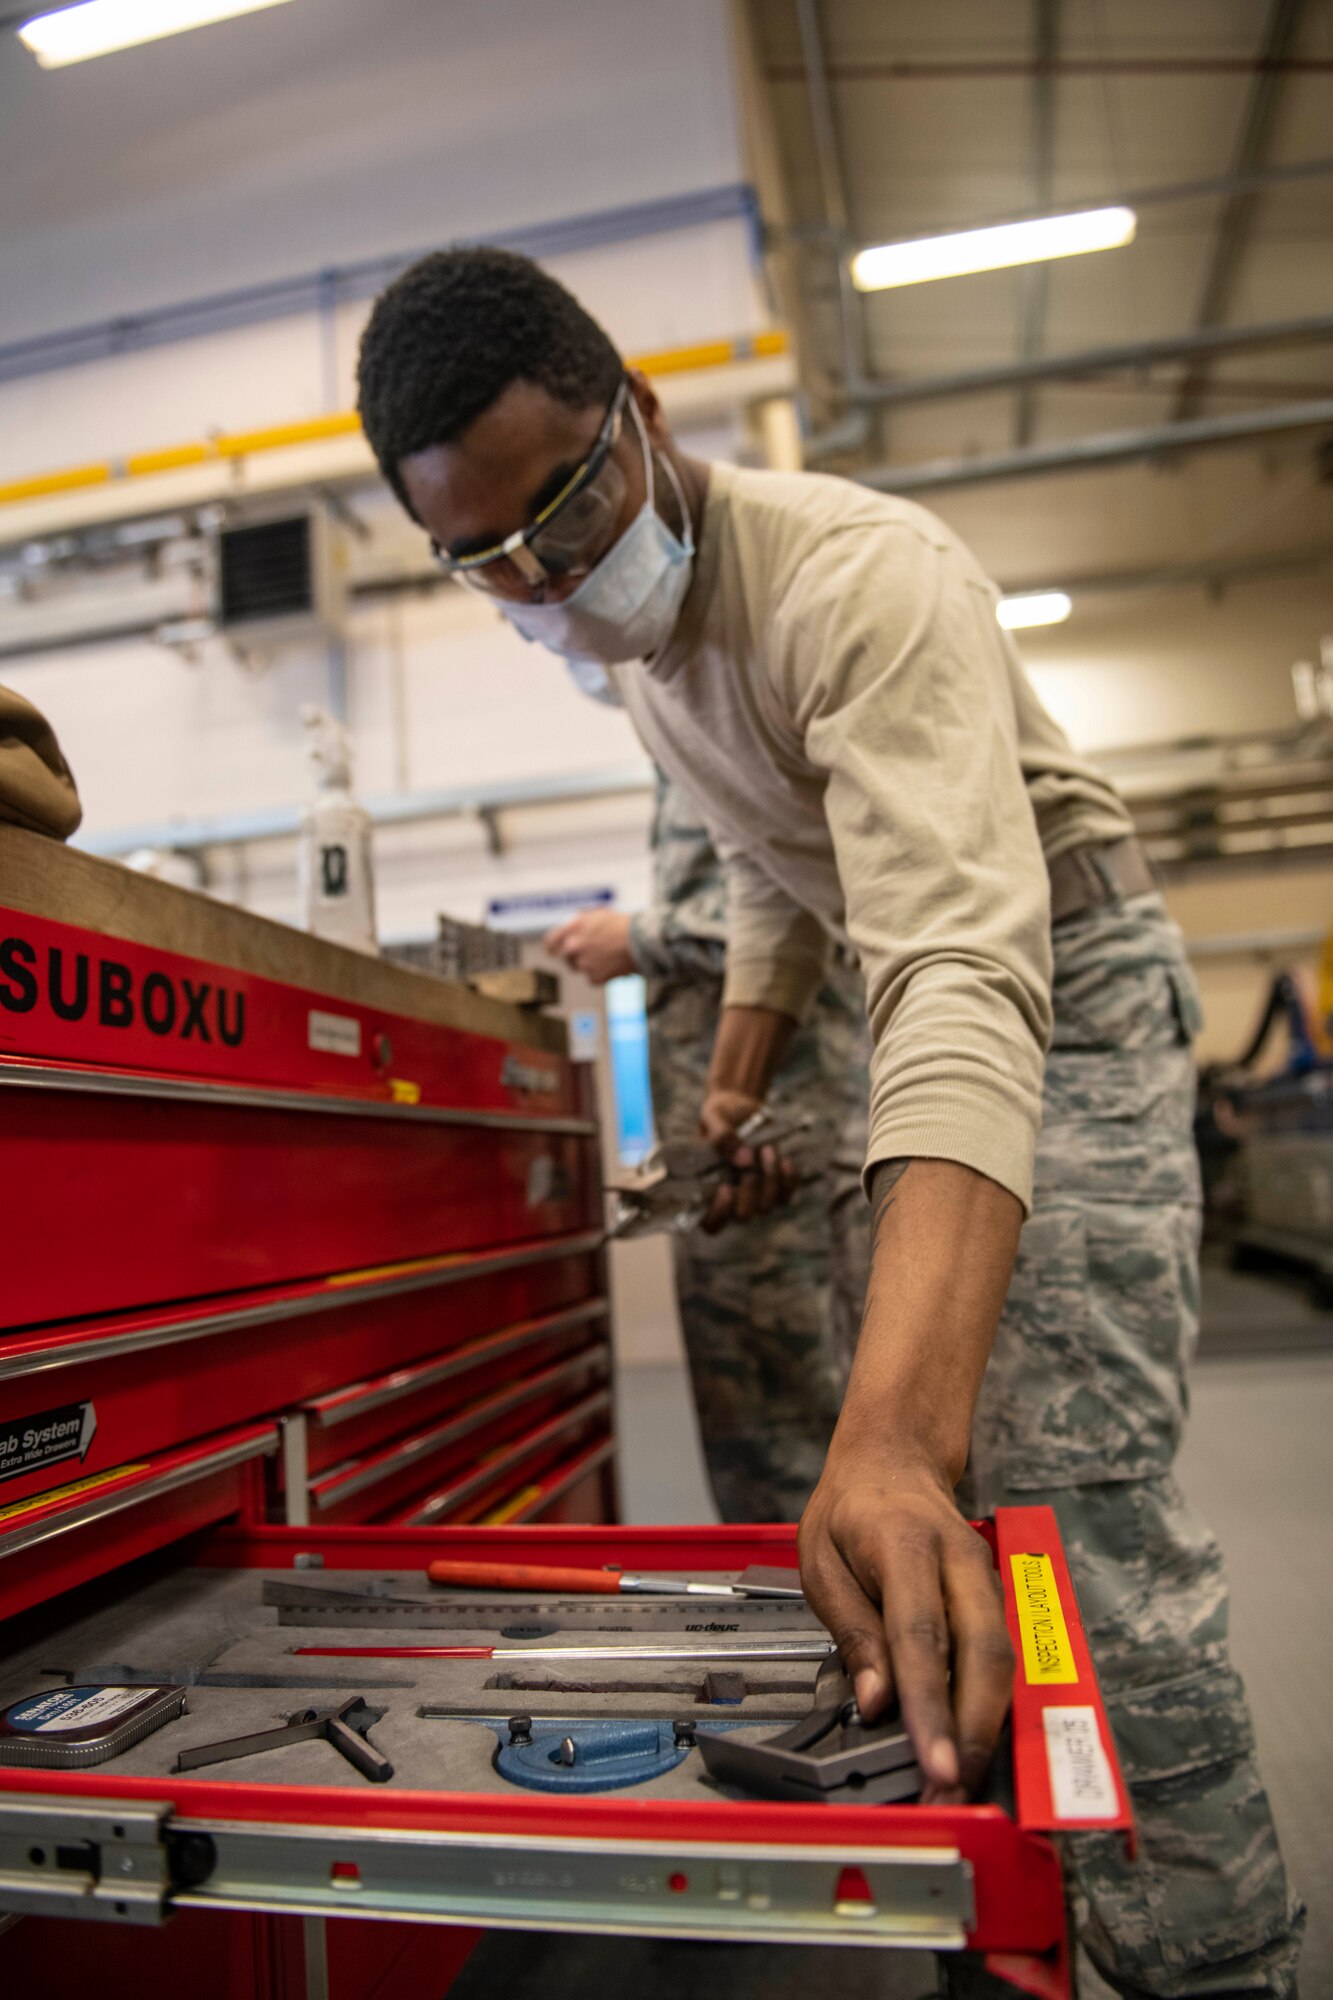 Airman 1st Class Jevaughn Harvey, 100th Maintenance Squadron aircraft structural maintenance apprentice, puts tools away after doing a training project at RAF Mildenhall, England, April 8, 2020. Airmen at the 100th MXS aircraft structural maintenance shop stay ready for the mission by conducting training projects such as taking out stuck screws from metal sheets. (U.S. Air Force Staff Sgt. Luke Milano)